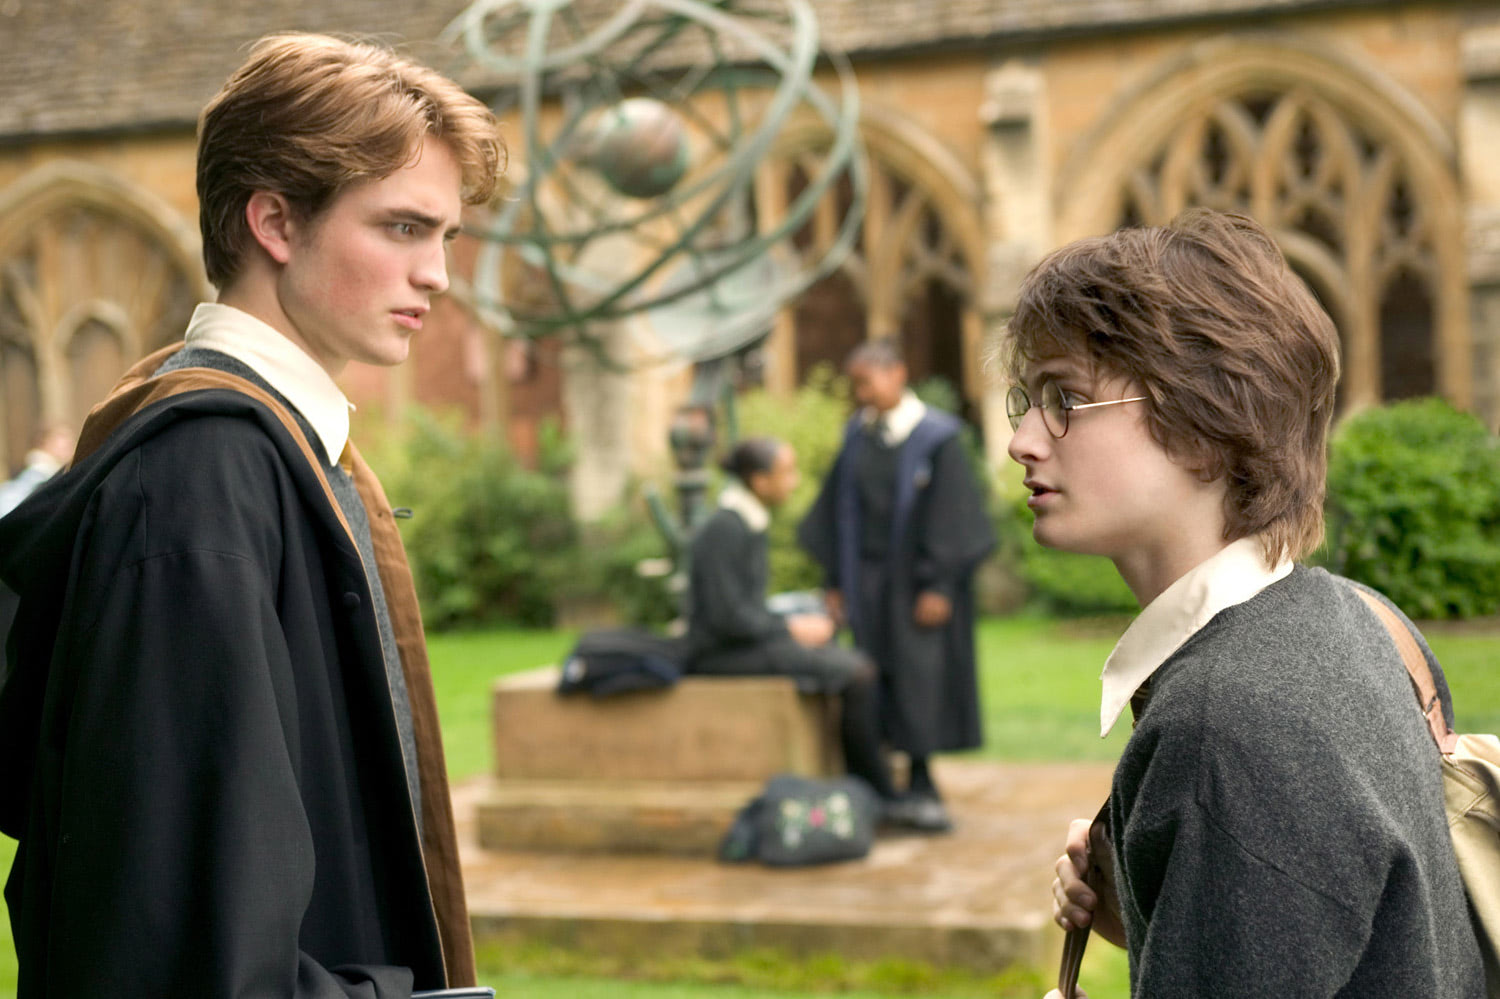 What was Cedric Diggory’s hint to Harry for the second task?